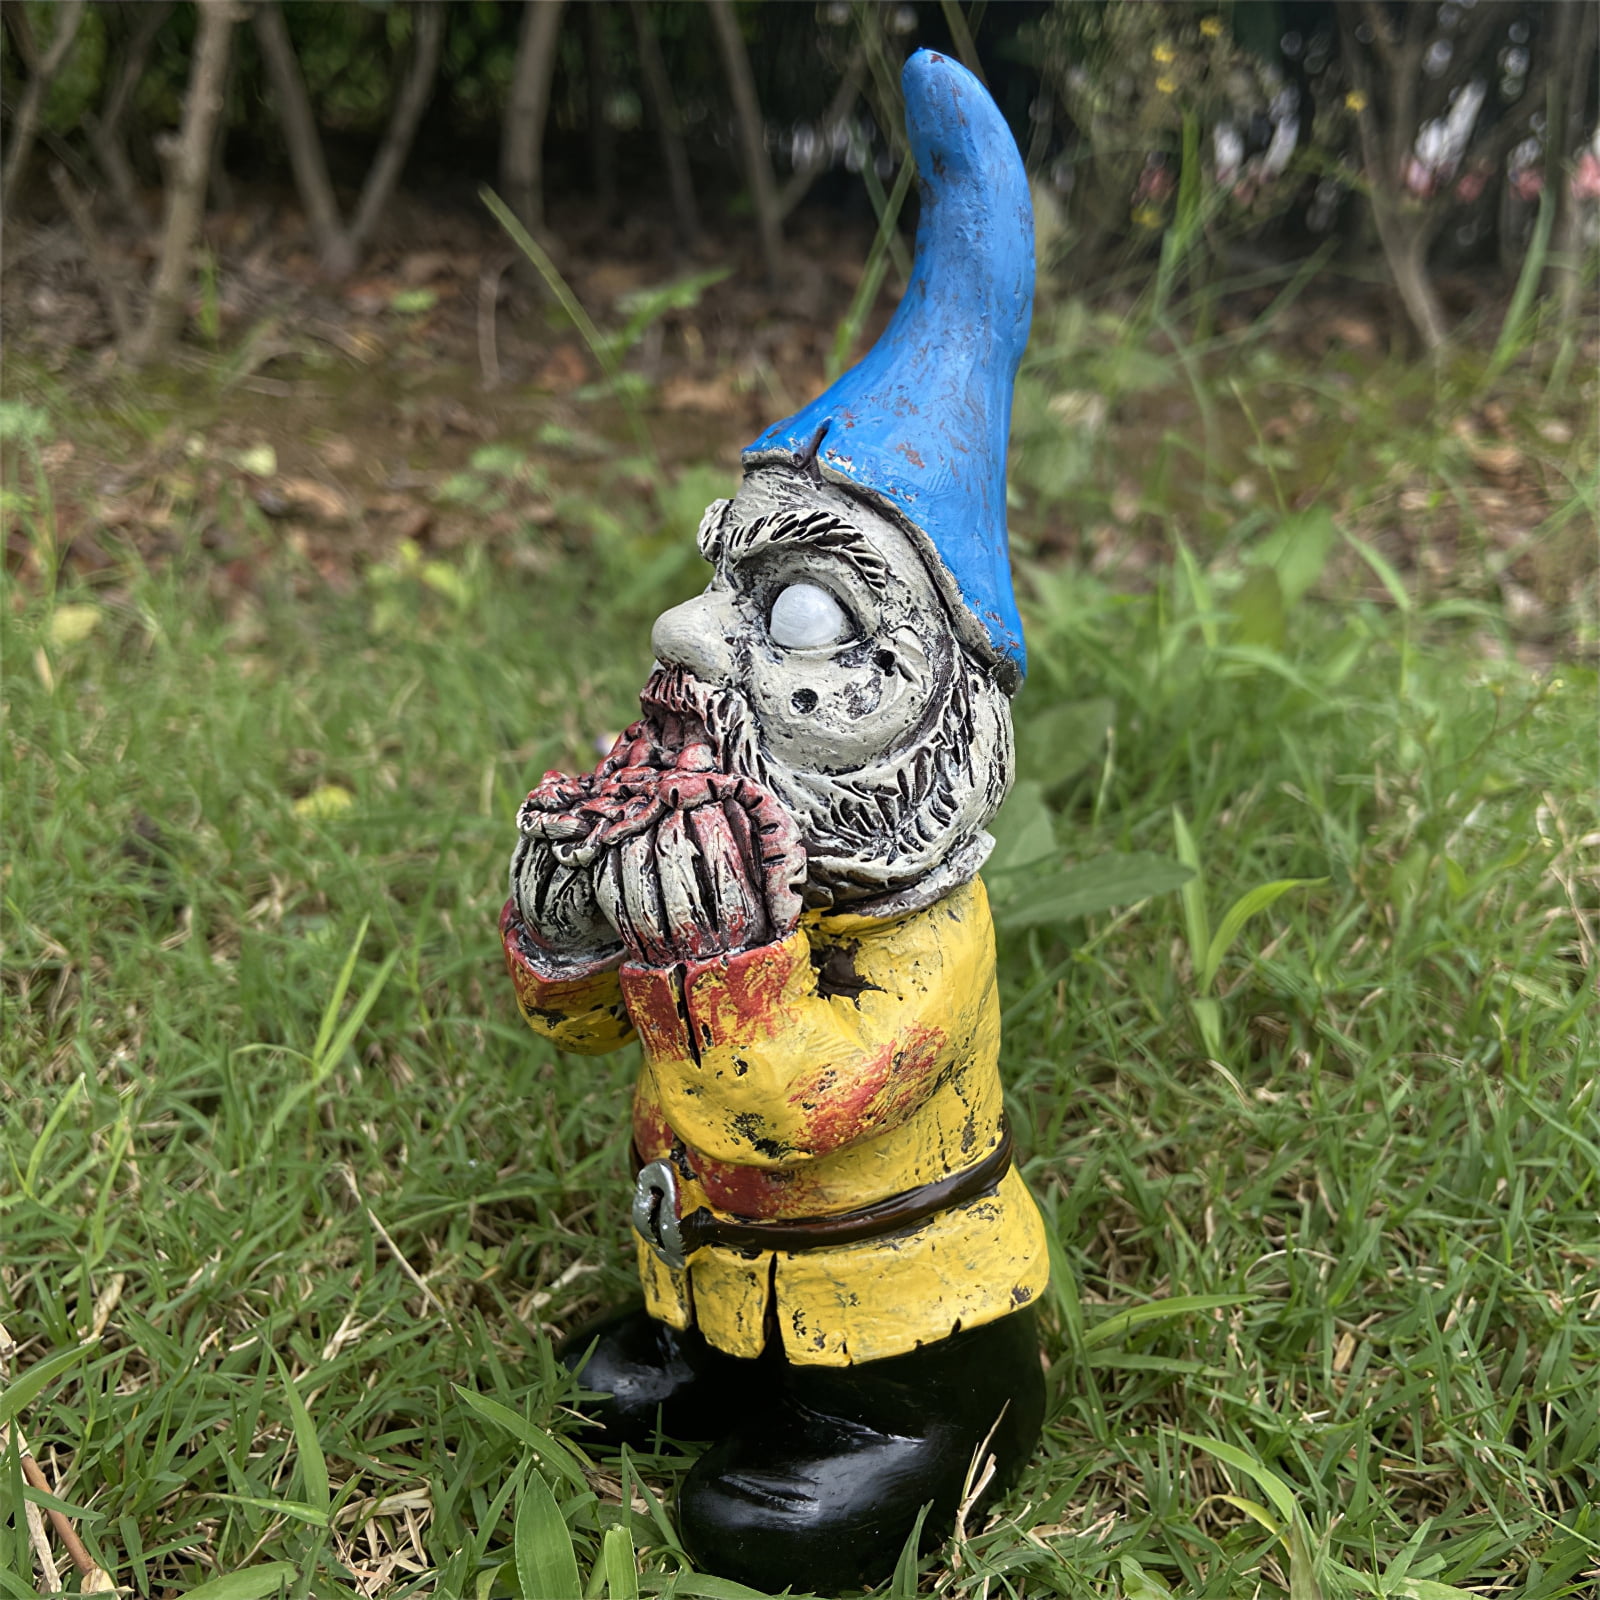 Details about   Scary Zombie Gnome Statue Funny Dwarf Resin Ornament Sculpture Garden Decoration 